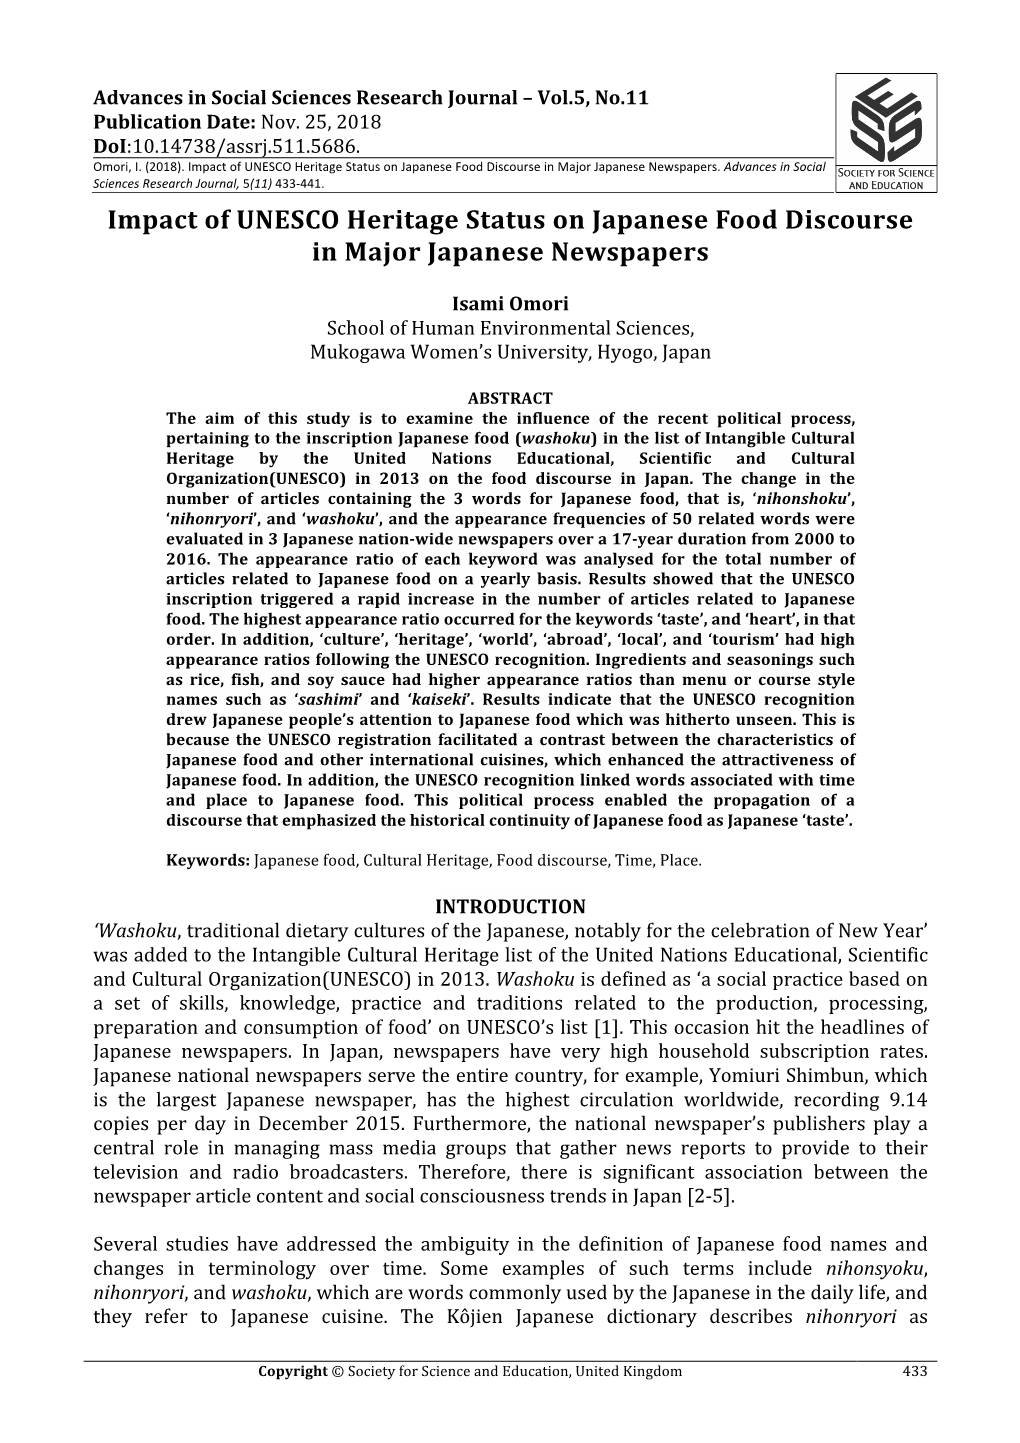 Impact of UNESCO Heritage Status on Japanese Food Discourse in Major Japanese Newspapers